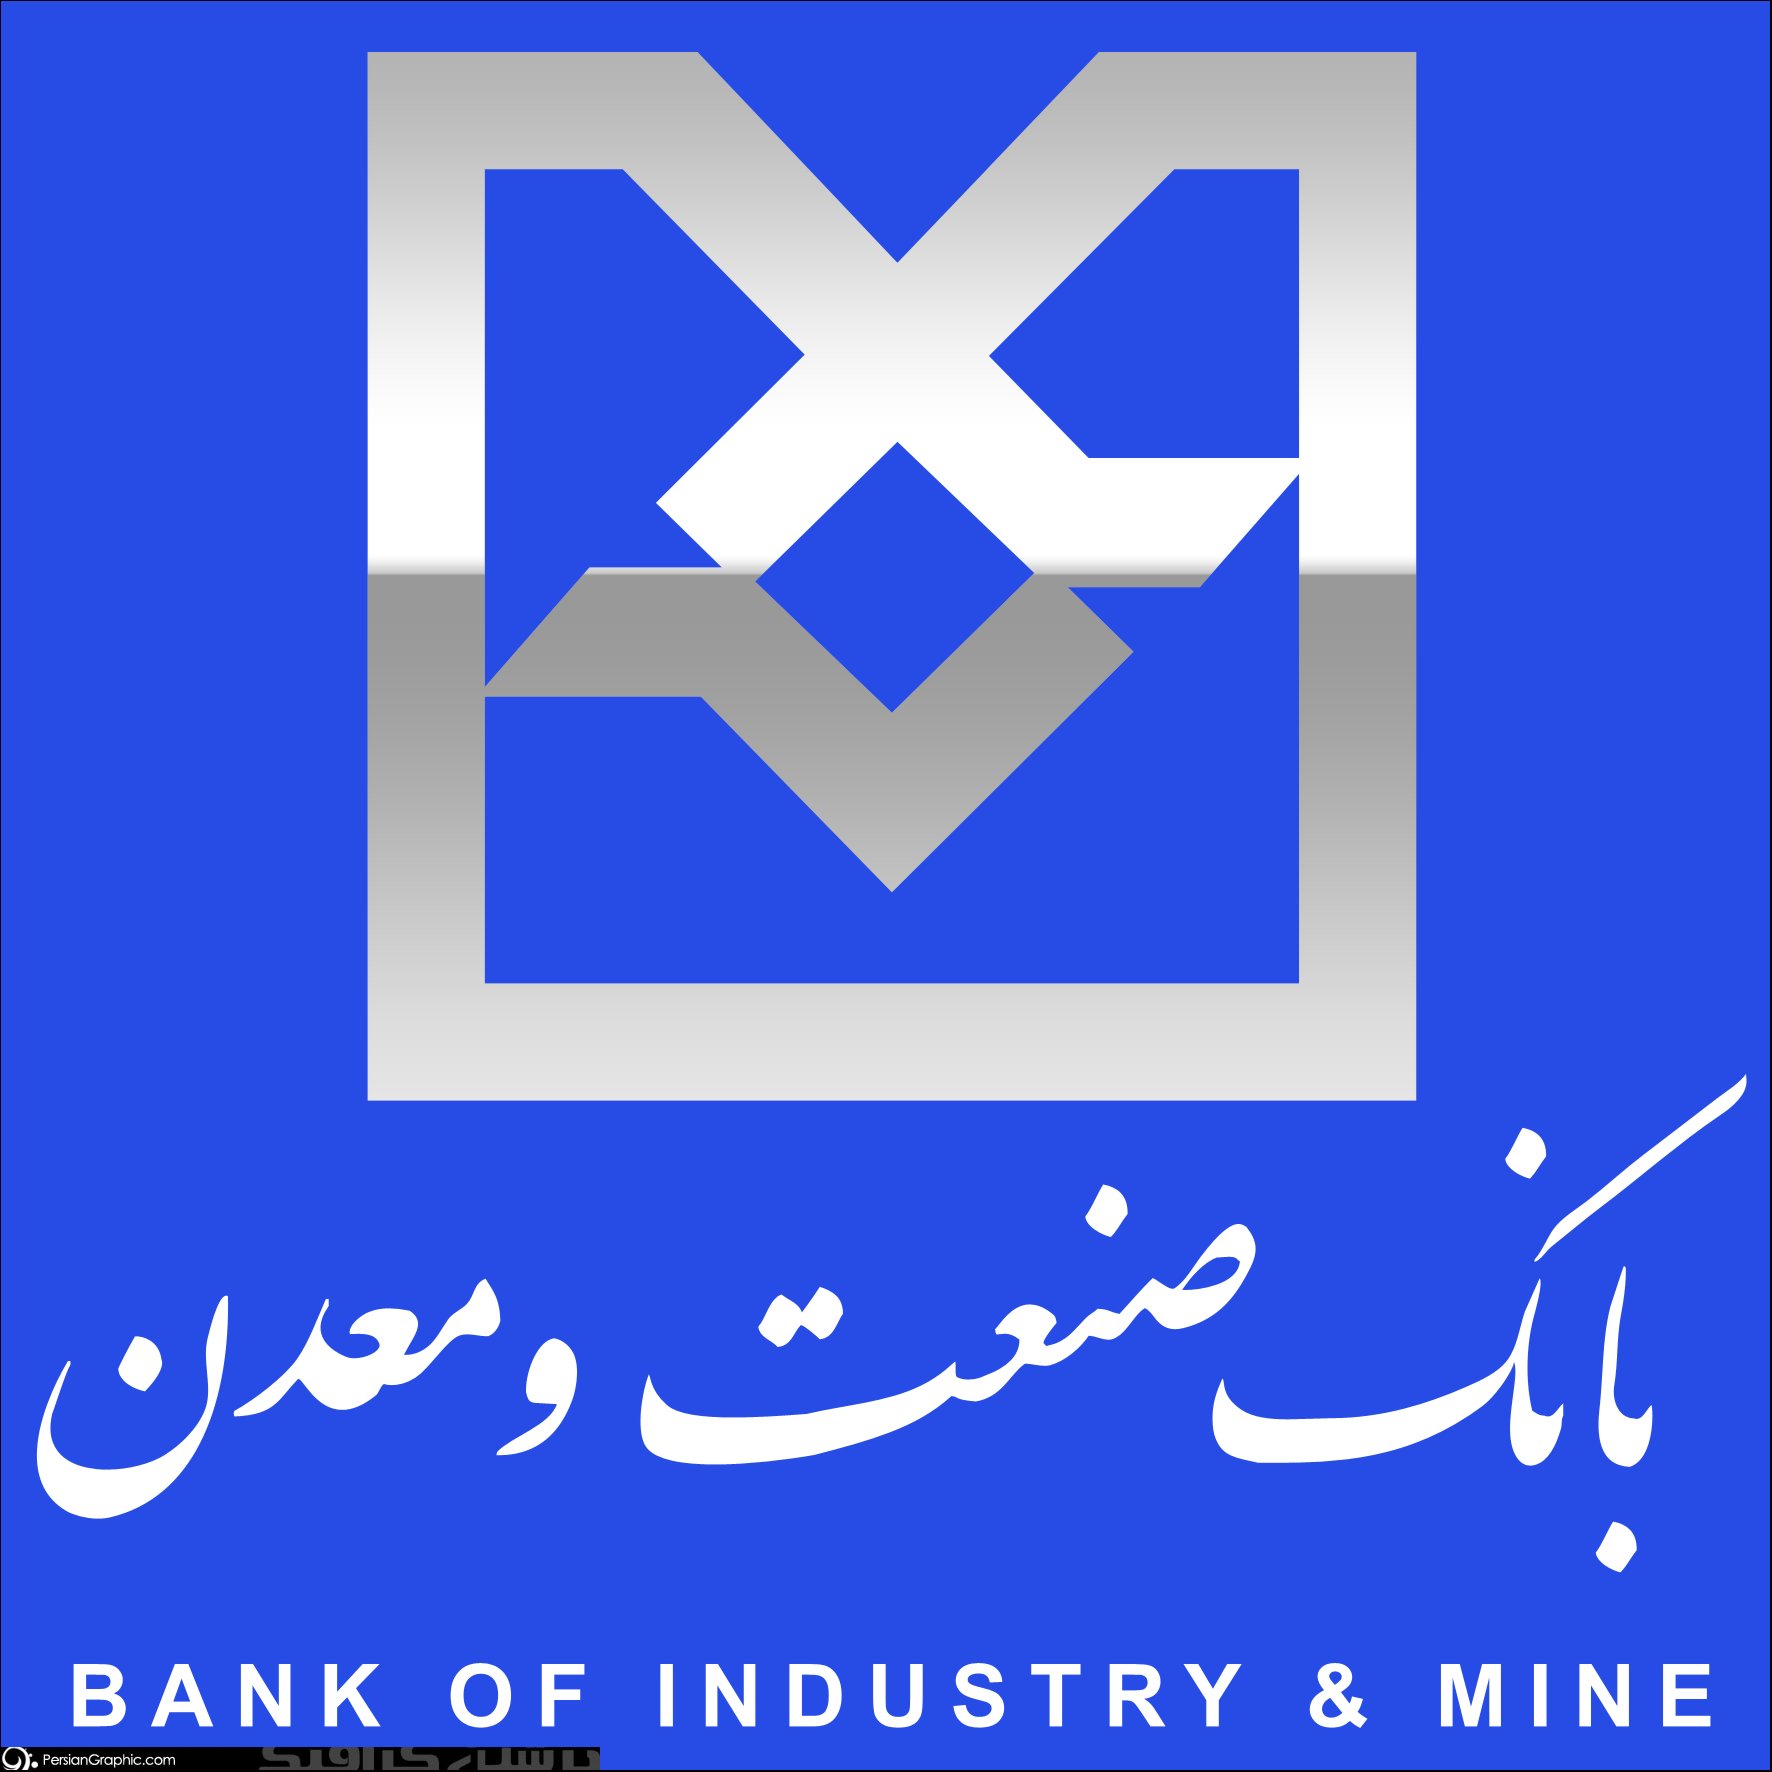 Appreciation of a large industrial unit from the Industry and Mine Bank